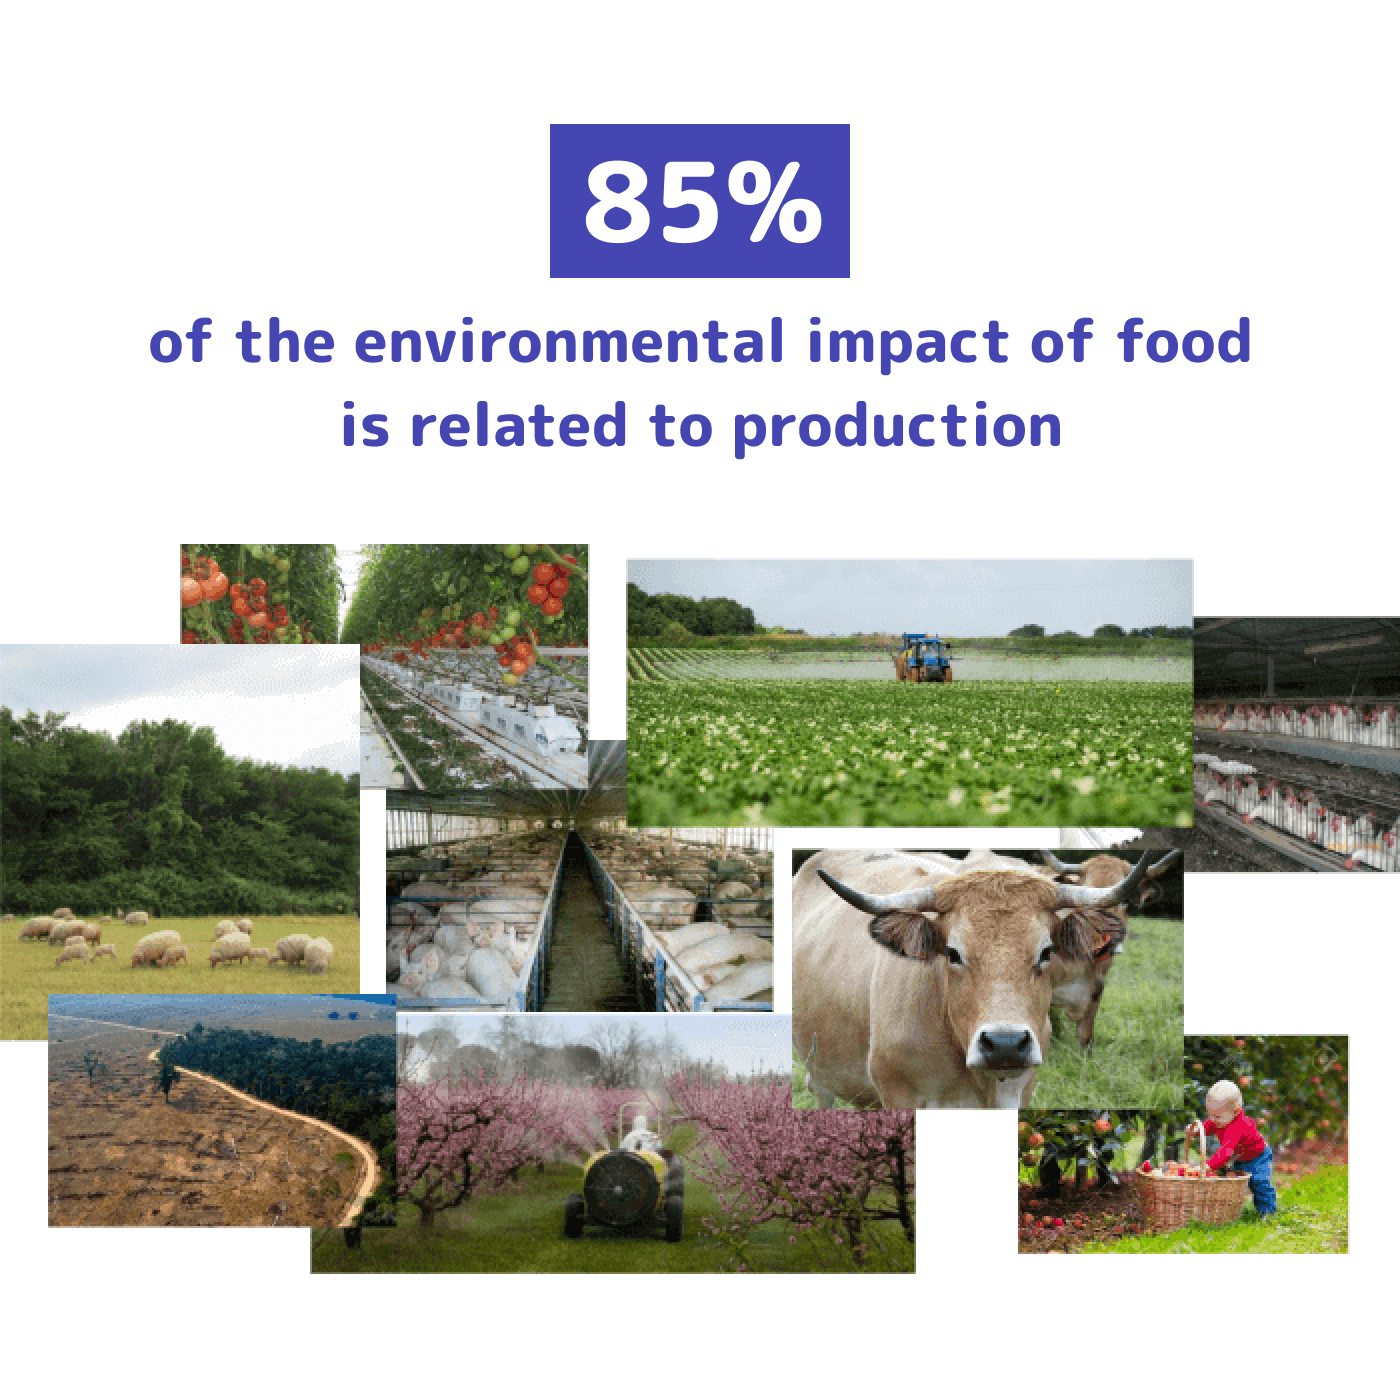 : Photo mosaic: 85% of the environmental impact is linked to production